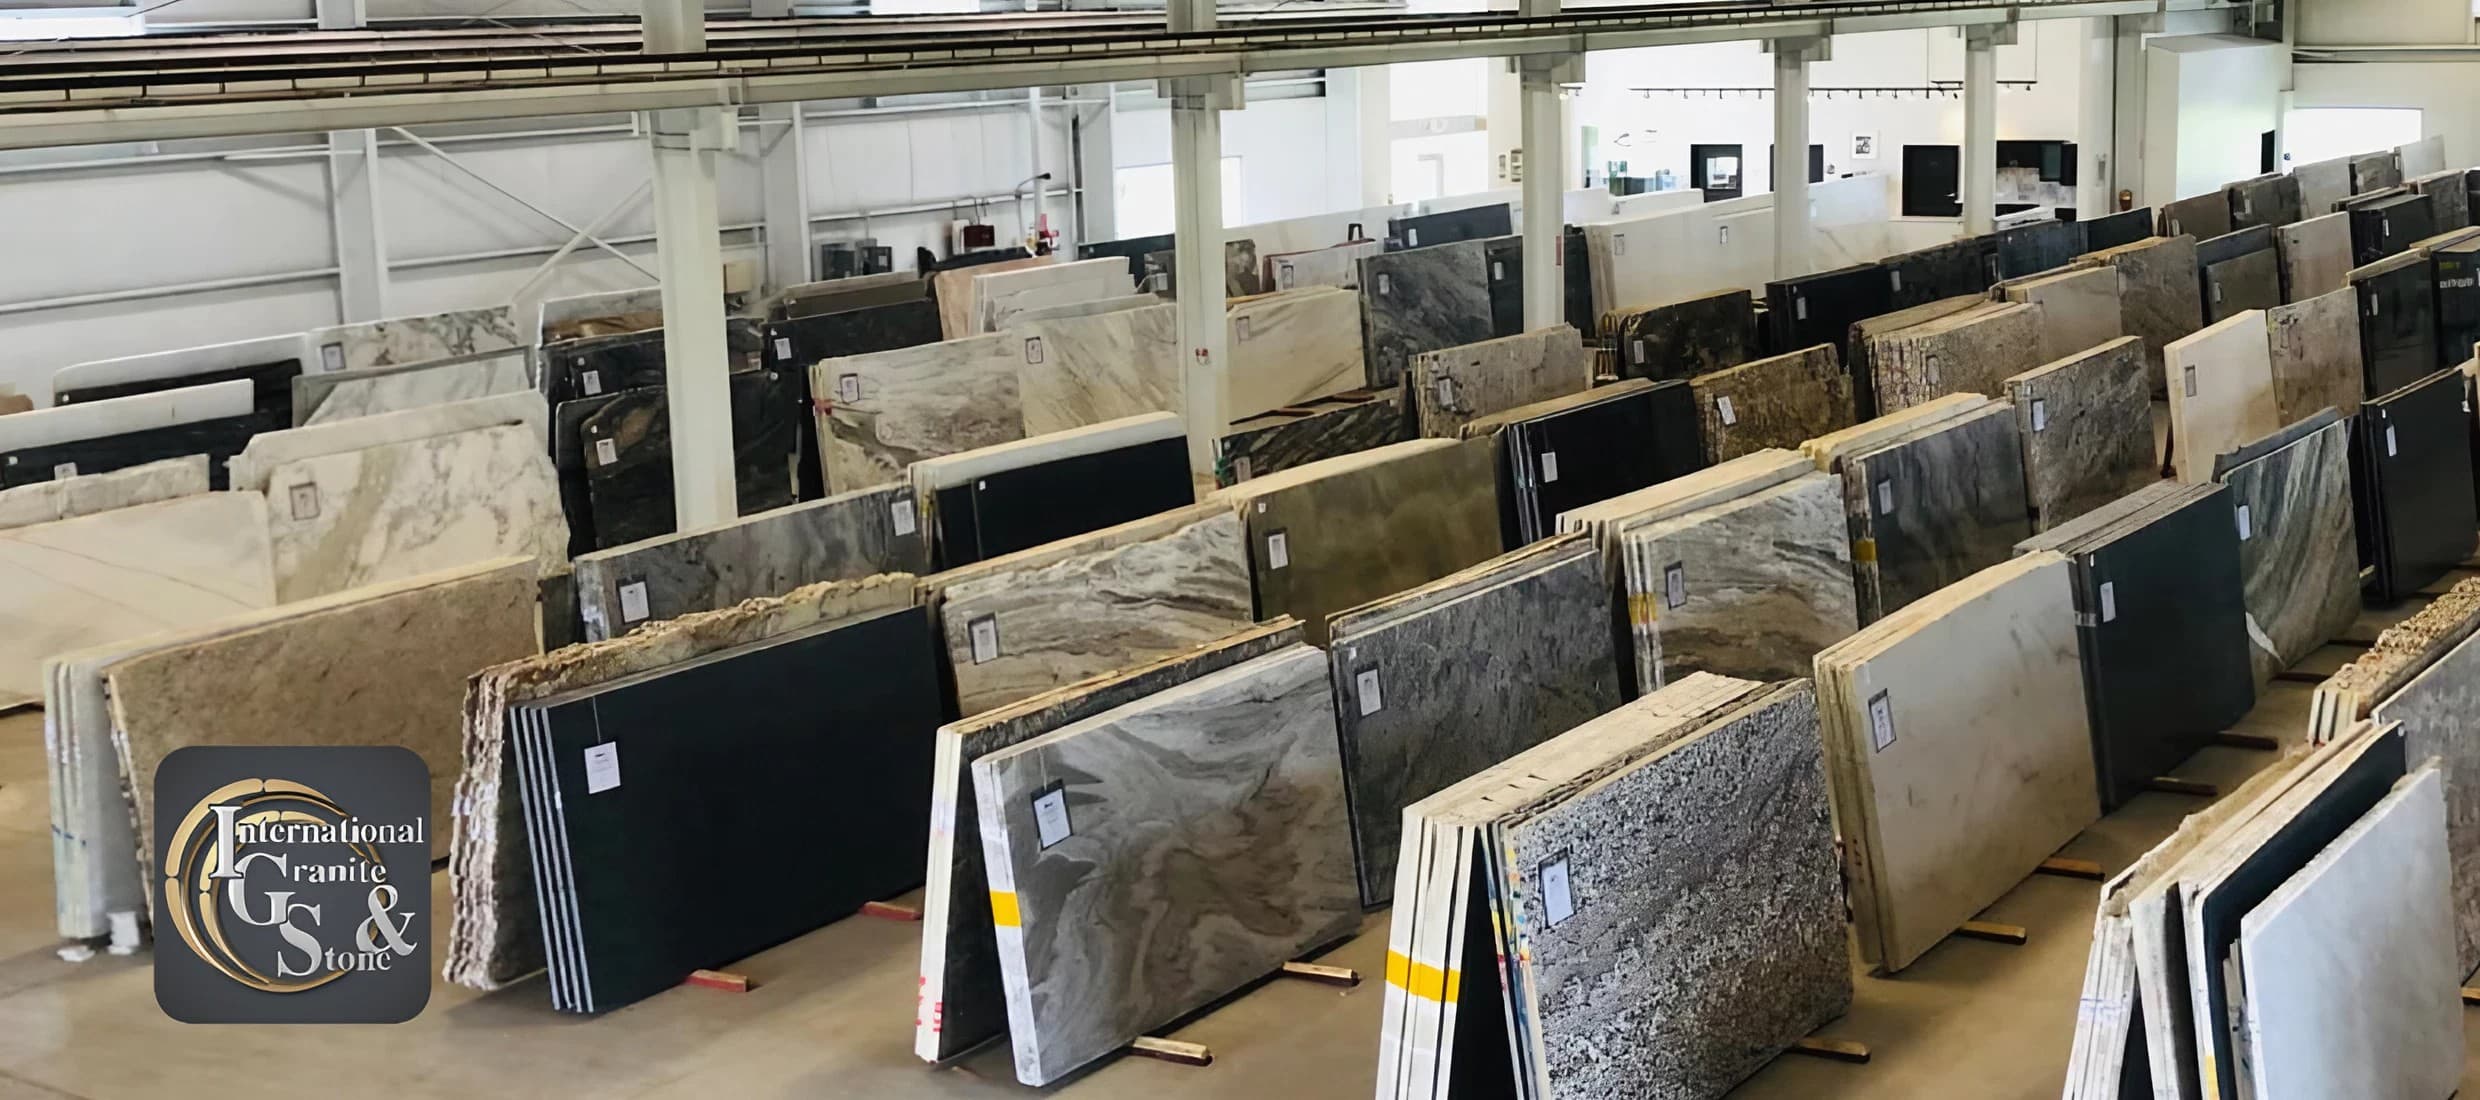 Image highlighting the vast and diverse collection of Granite Slab Colors at IGS Countertops, showcasing the richness and variety of hues and patterns available for crafting premium Granite Countertops.